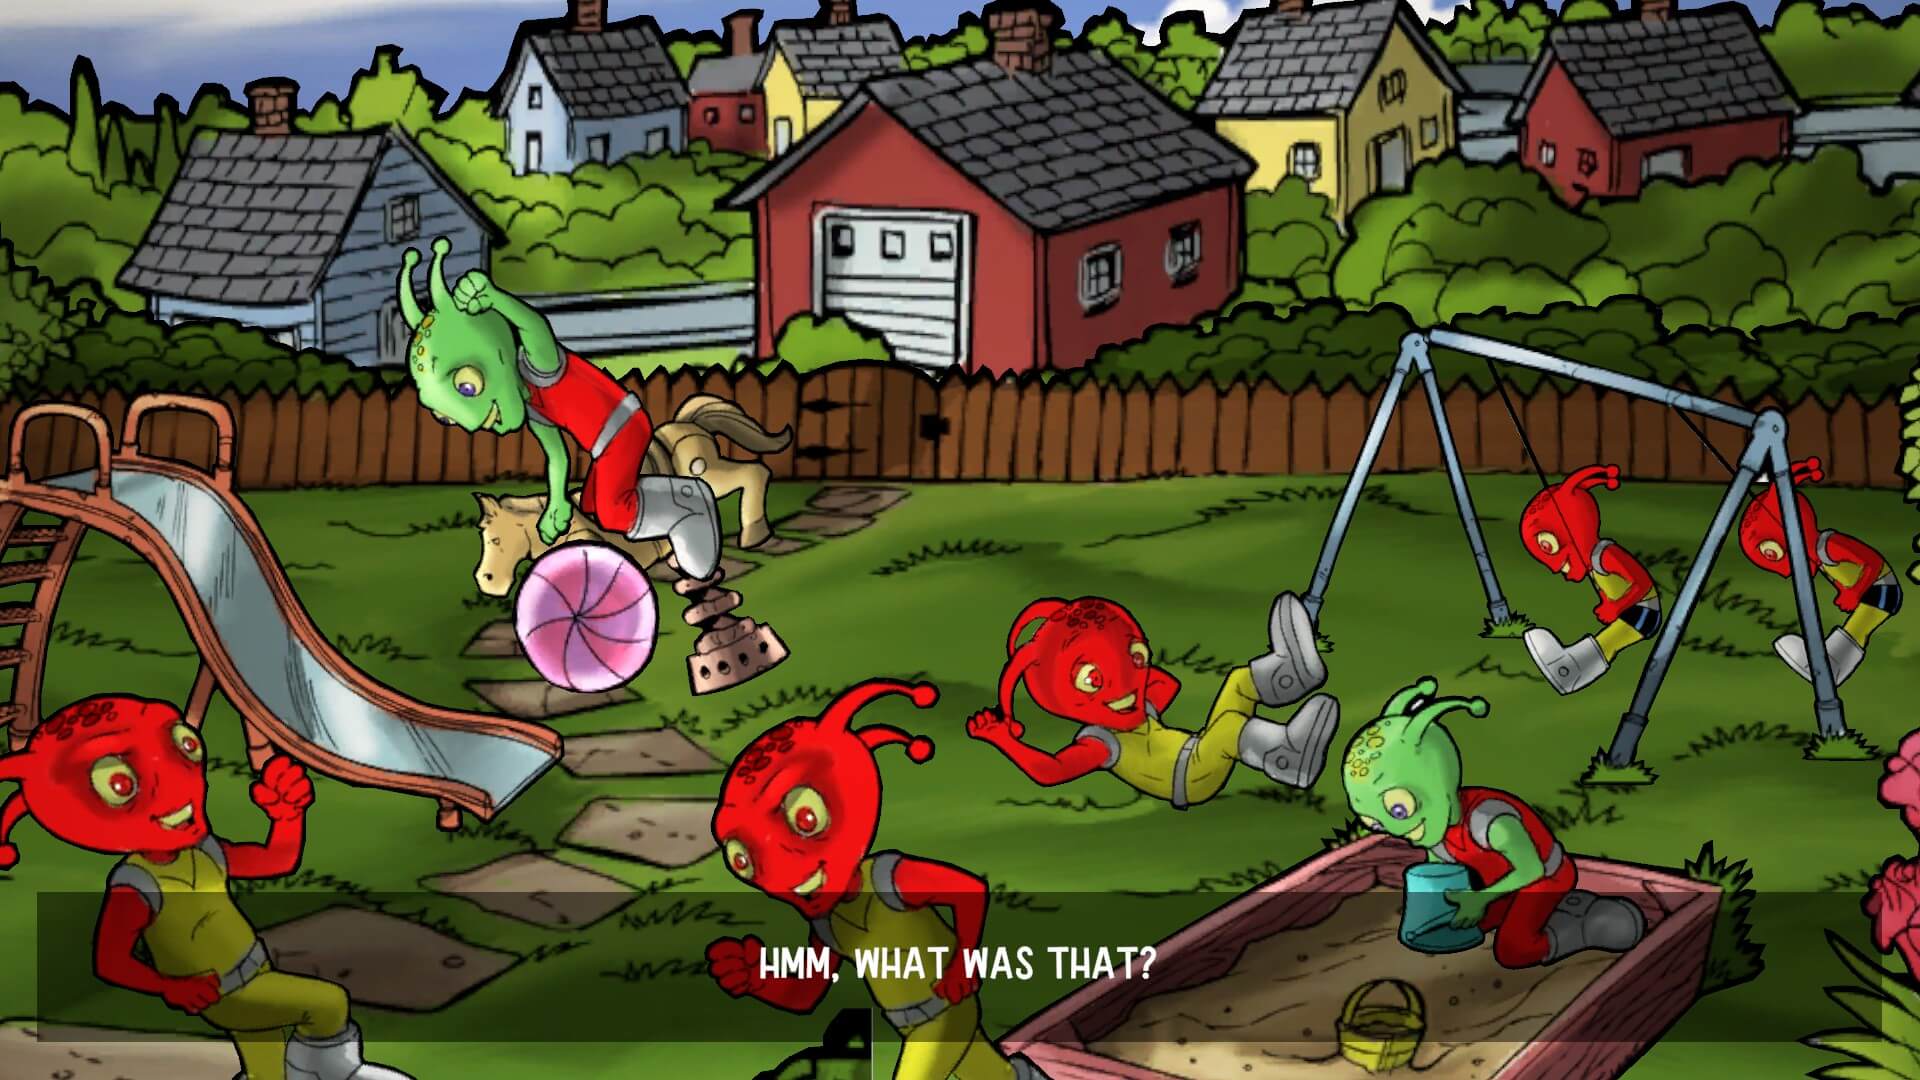 Martians being carefree in a park. This is shown in one of the comic strips.